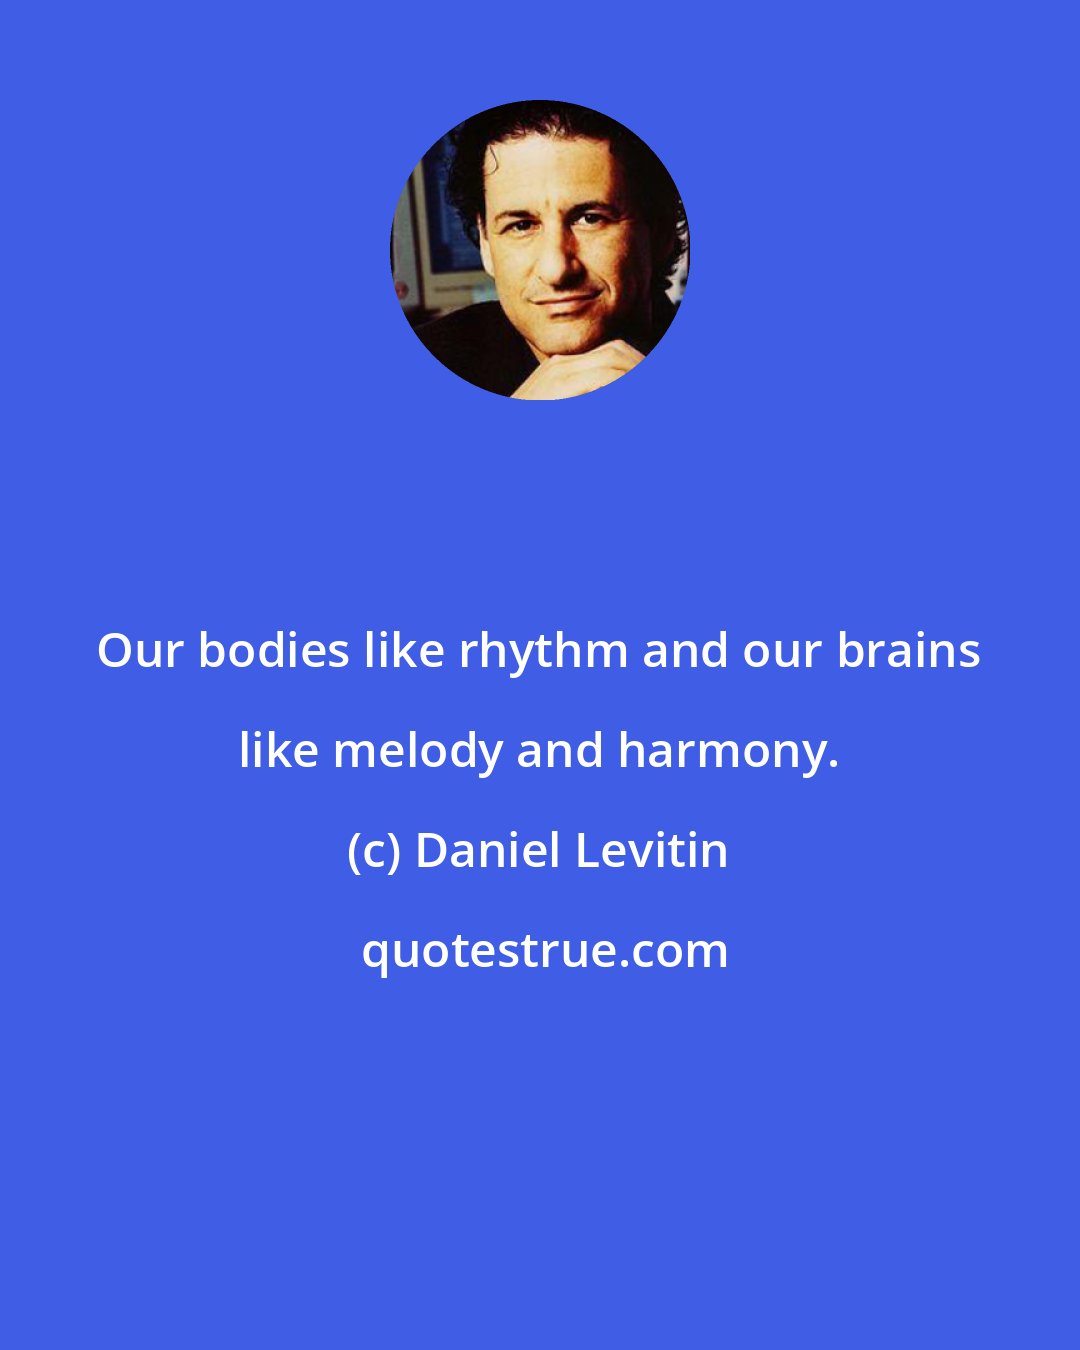 Daniel Levitin: Our bodies like rhythm and our brains like melody and harmony.